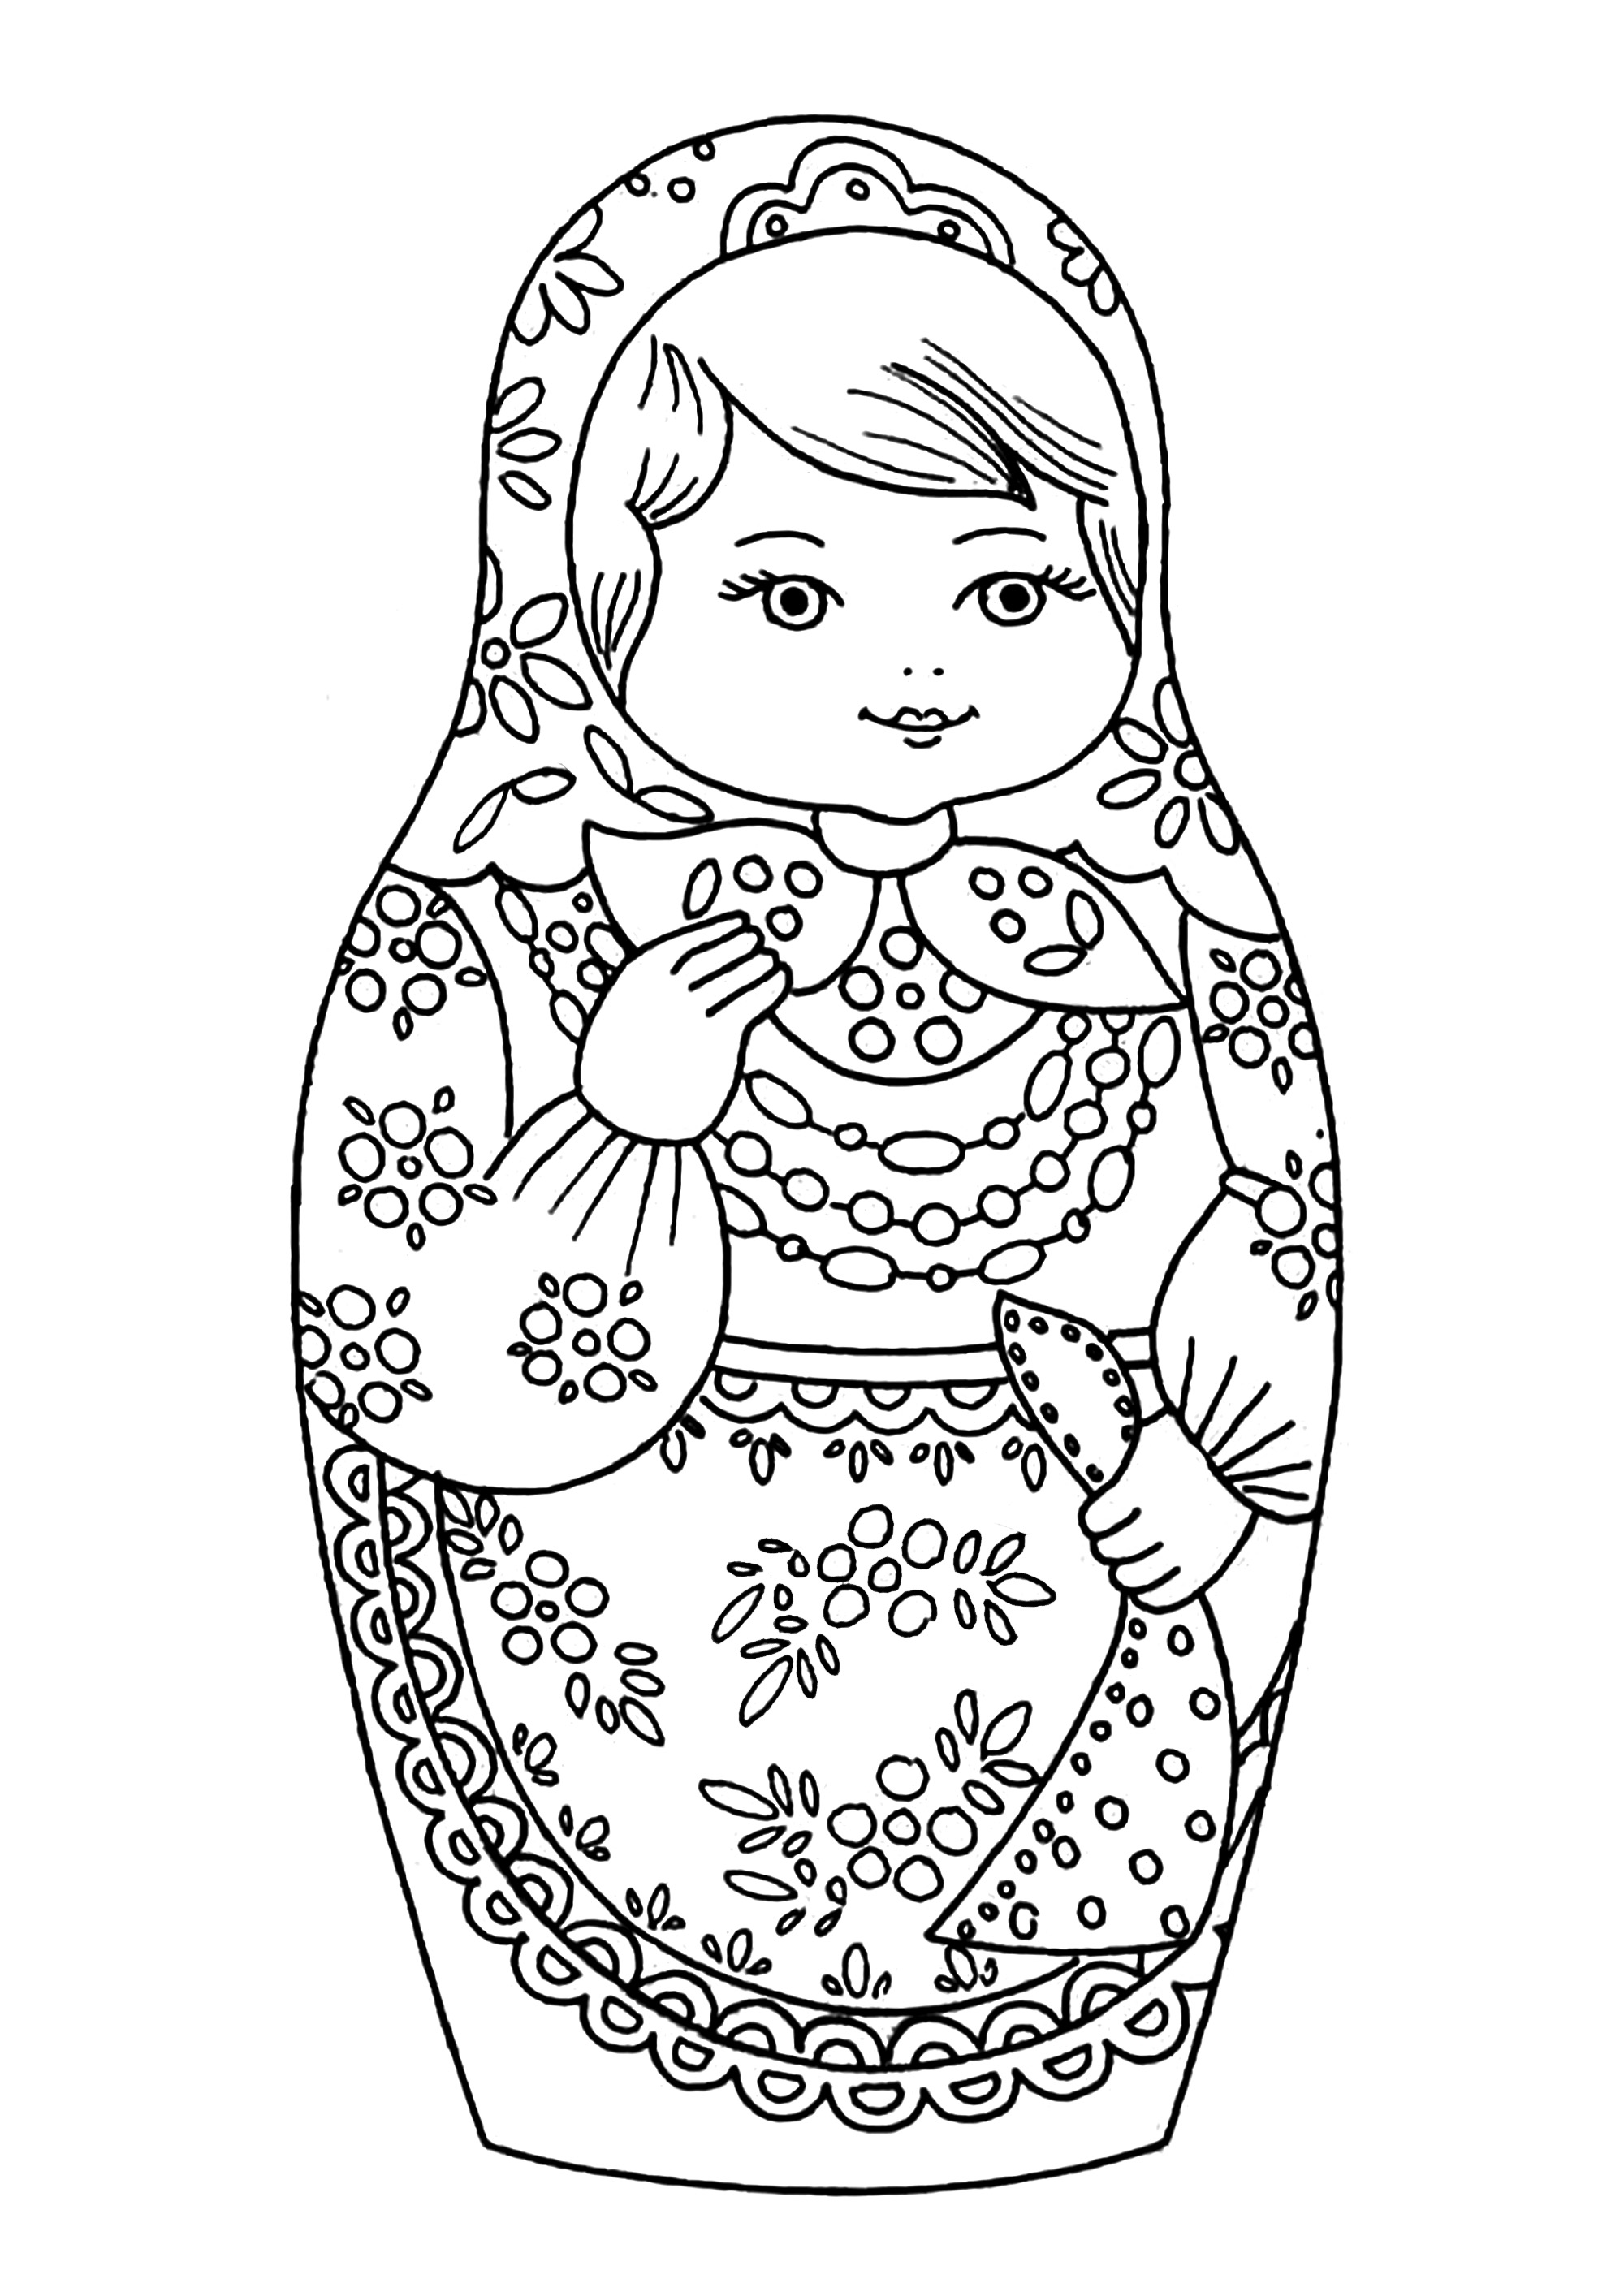 Coloring page : Russian dolls - 1